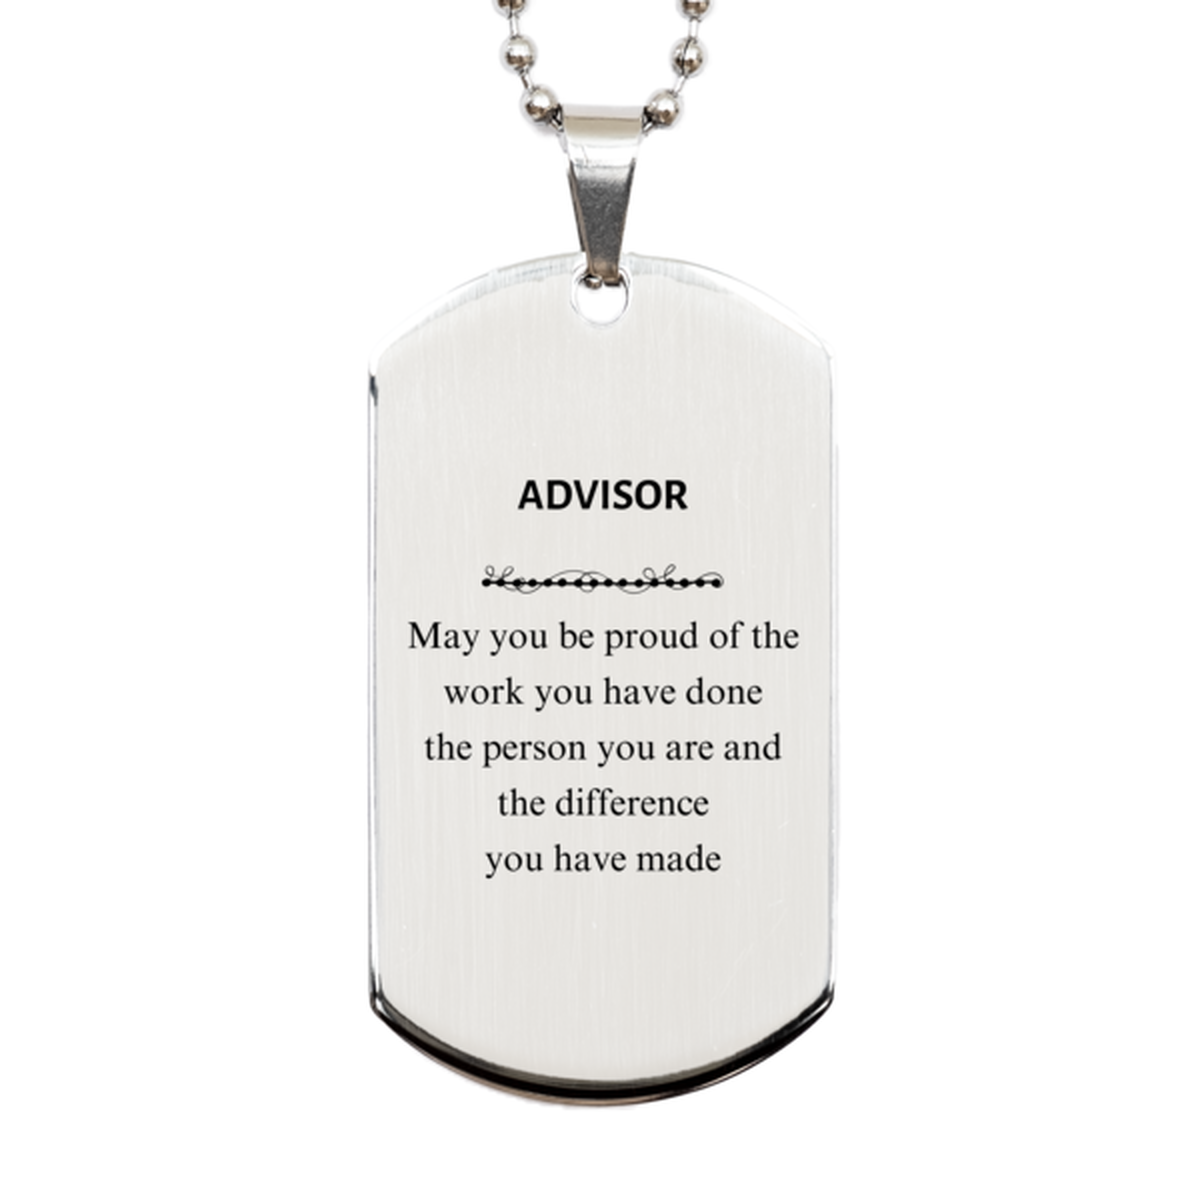 Advisor May you be proud of the work you have done, Retirement Advisor Silver Dog Tag for Colleague Appreciation Gifts Amazing for Advisor